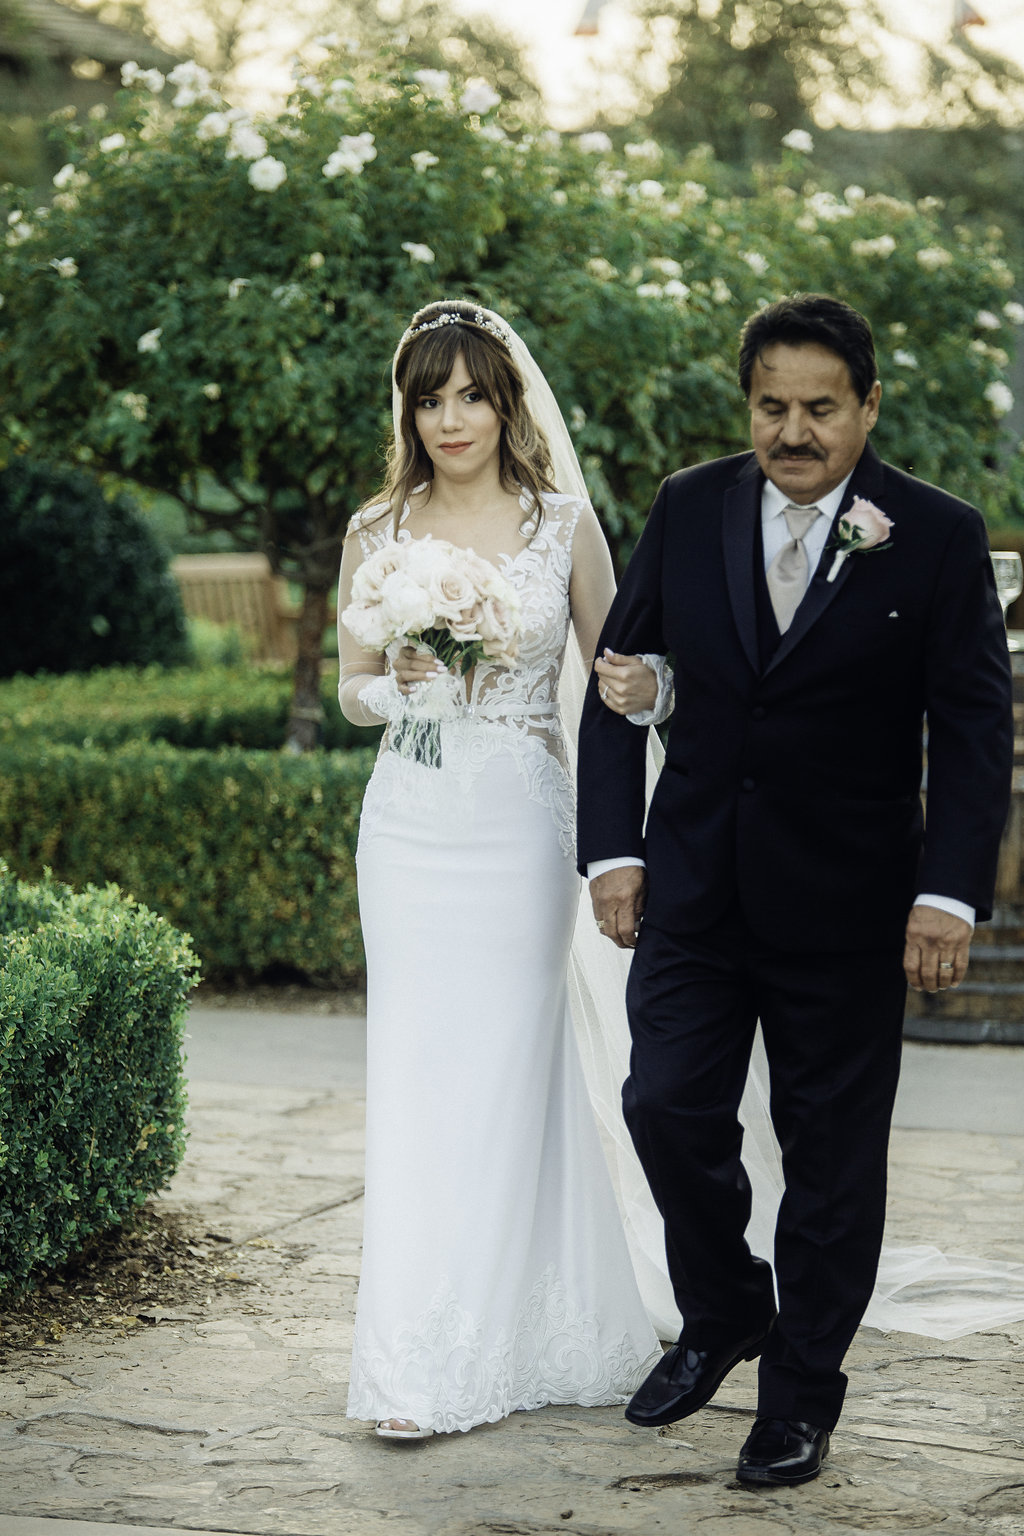 Wedding Photograph Of Bride And Father in Black Suit Walking Los Angeles